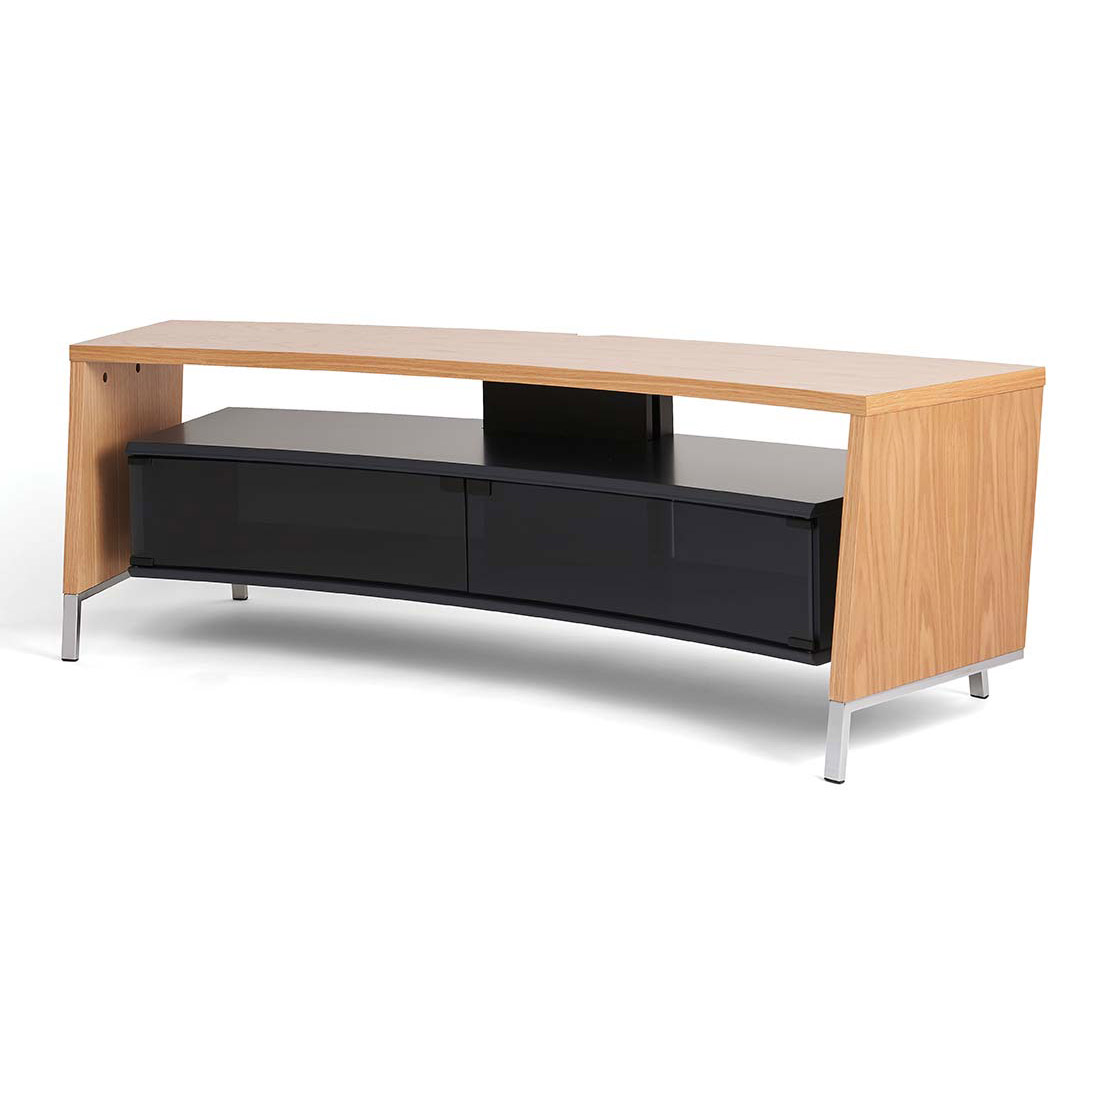 Image of Off The Wall CRV1500LW 1560mm Wide Curved TV Cabinet in Light Wood